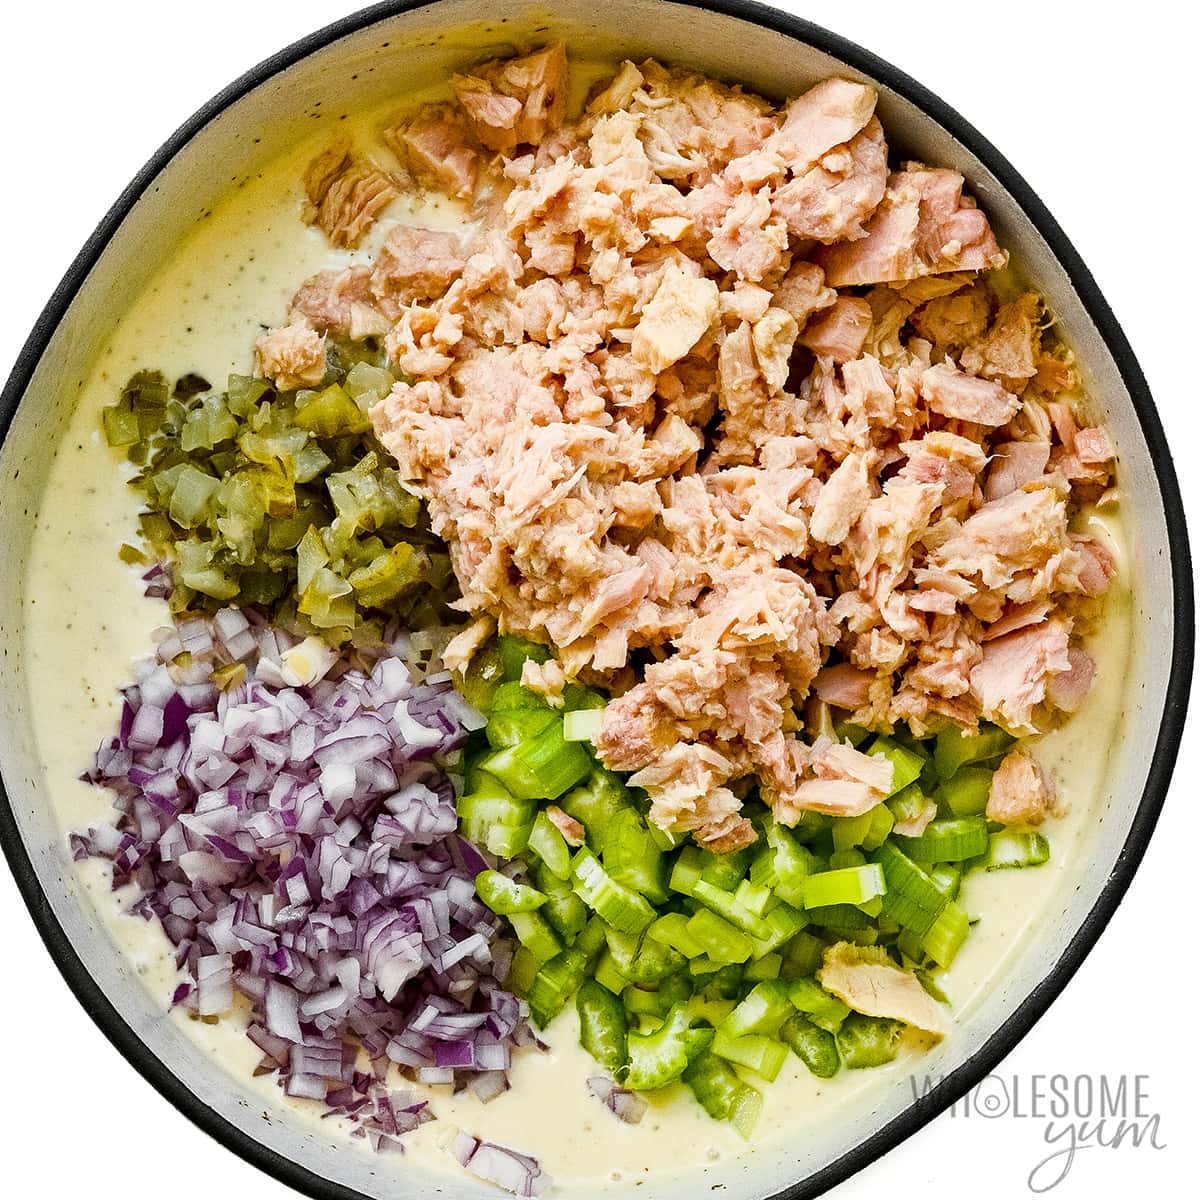 Tuna, celery, onion, pickles, and parsley in the bowl with dressing.